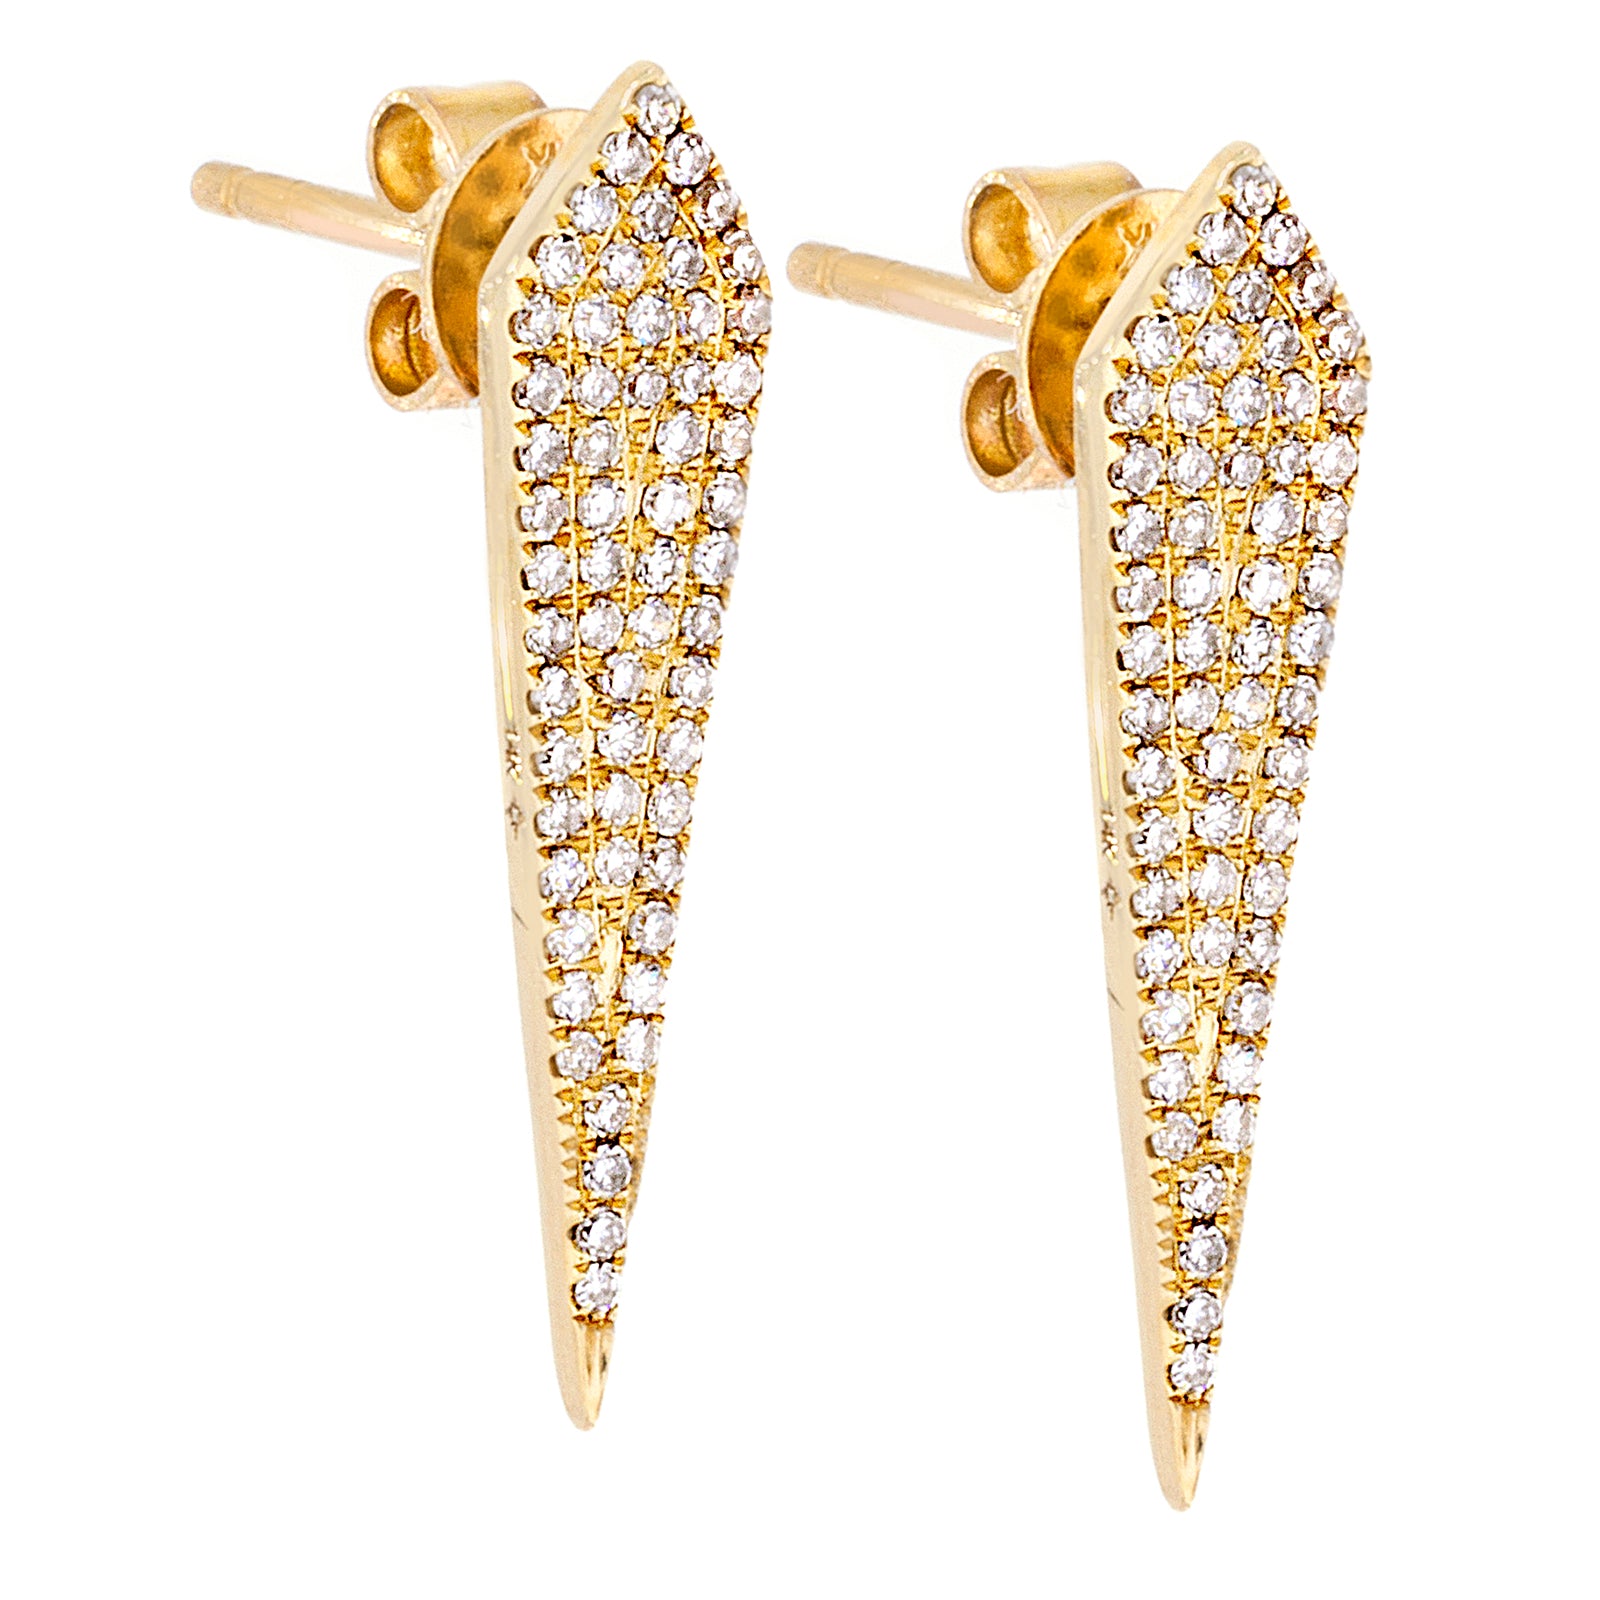 Diamonds Pave & 14K Yellow Gold Earrings - SOLD/CAN BE SPECIAL ORDERED WITH 4-6 WEEKS DELIVERY TIME FRAME